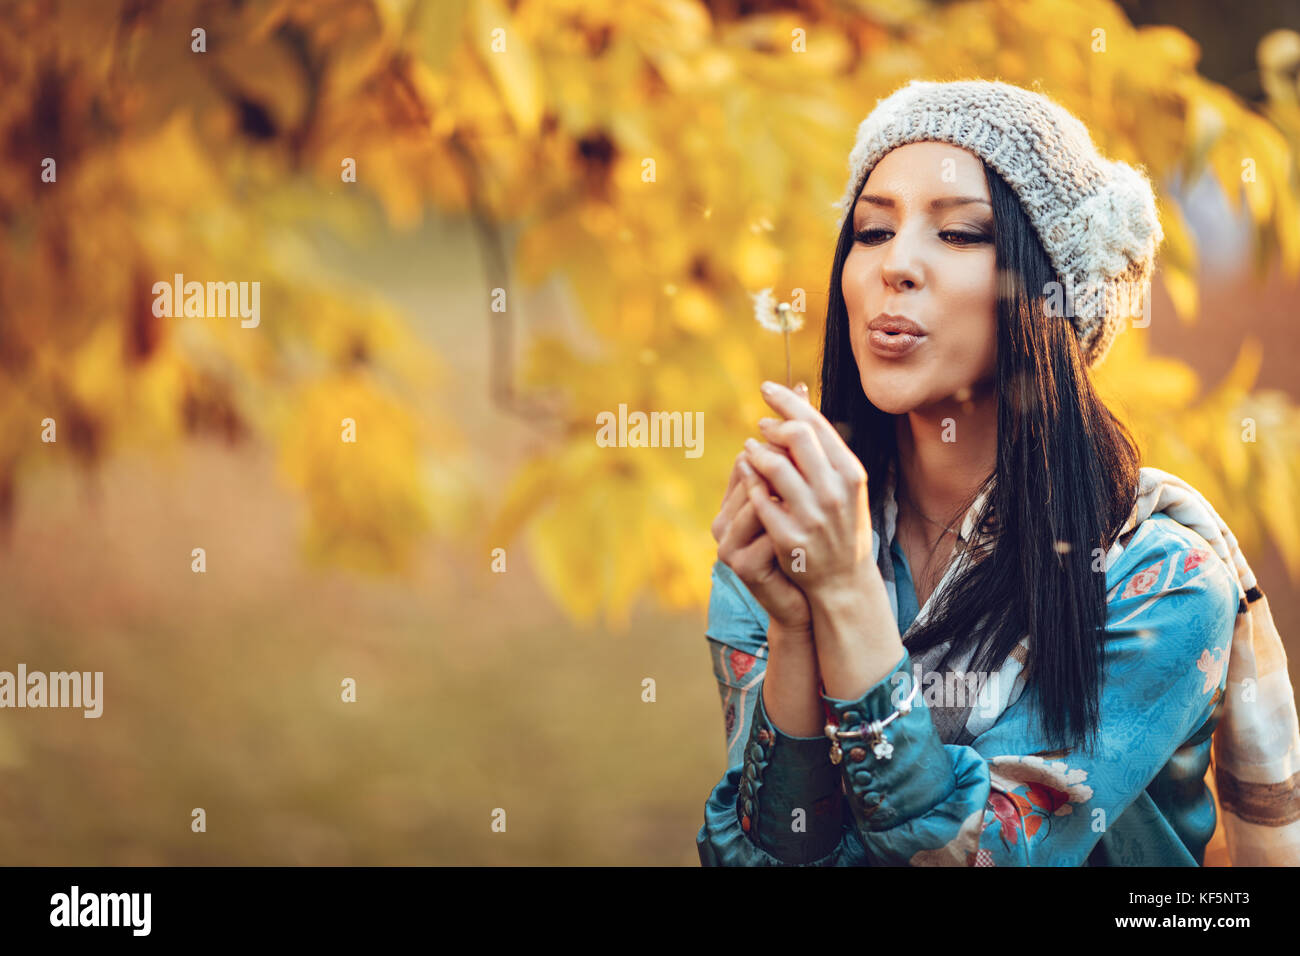 Portrait of young beautiful smiling positive young woman blowing dandelion in autumn park. Banque D'Images